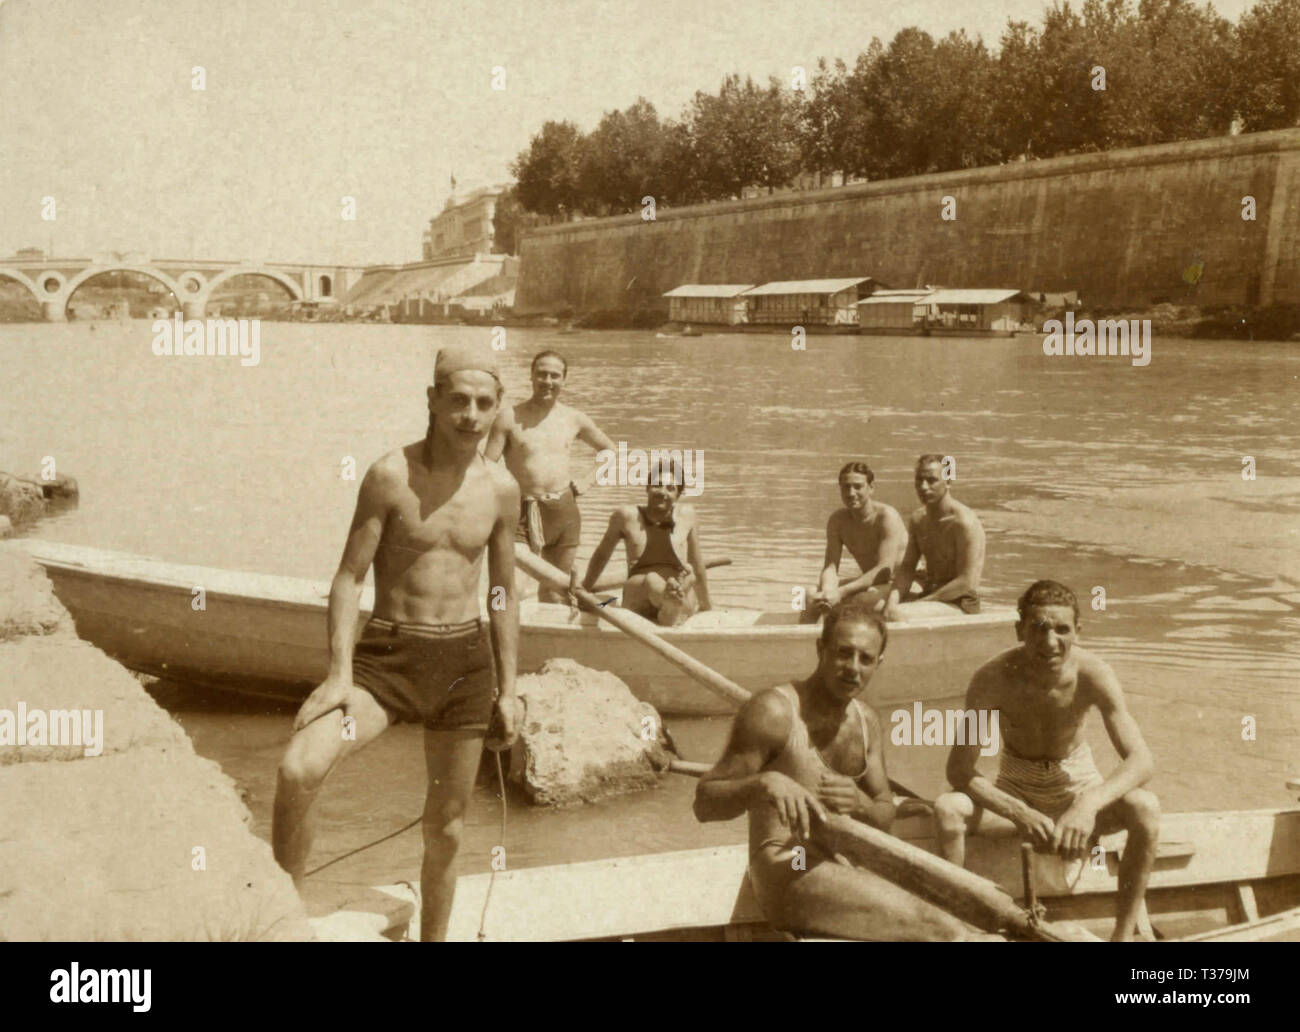 River people, Rome, Italy 1920s Stock Photo